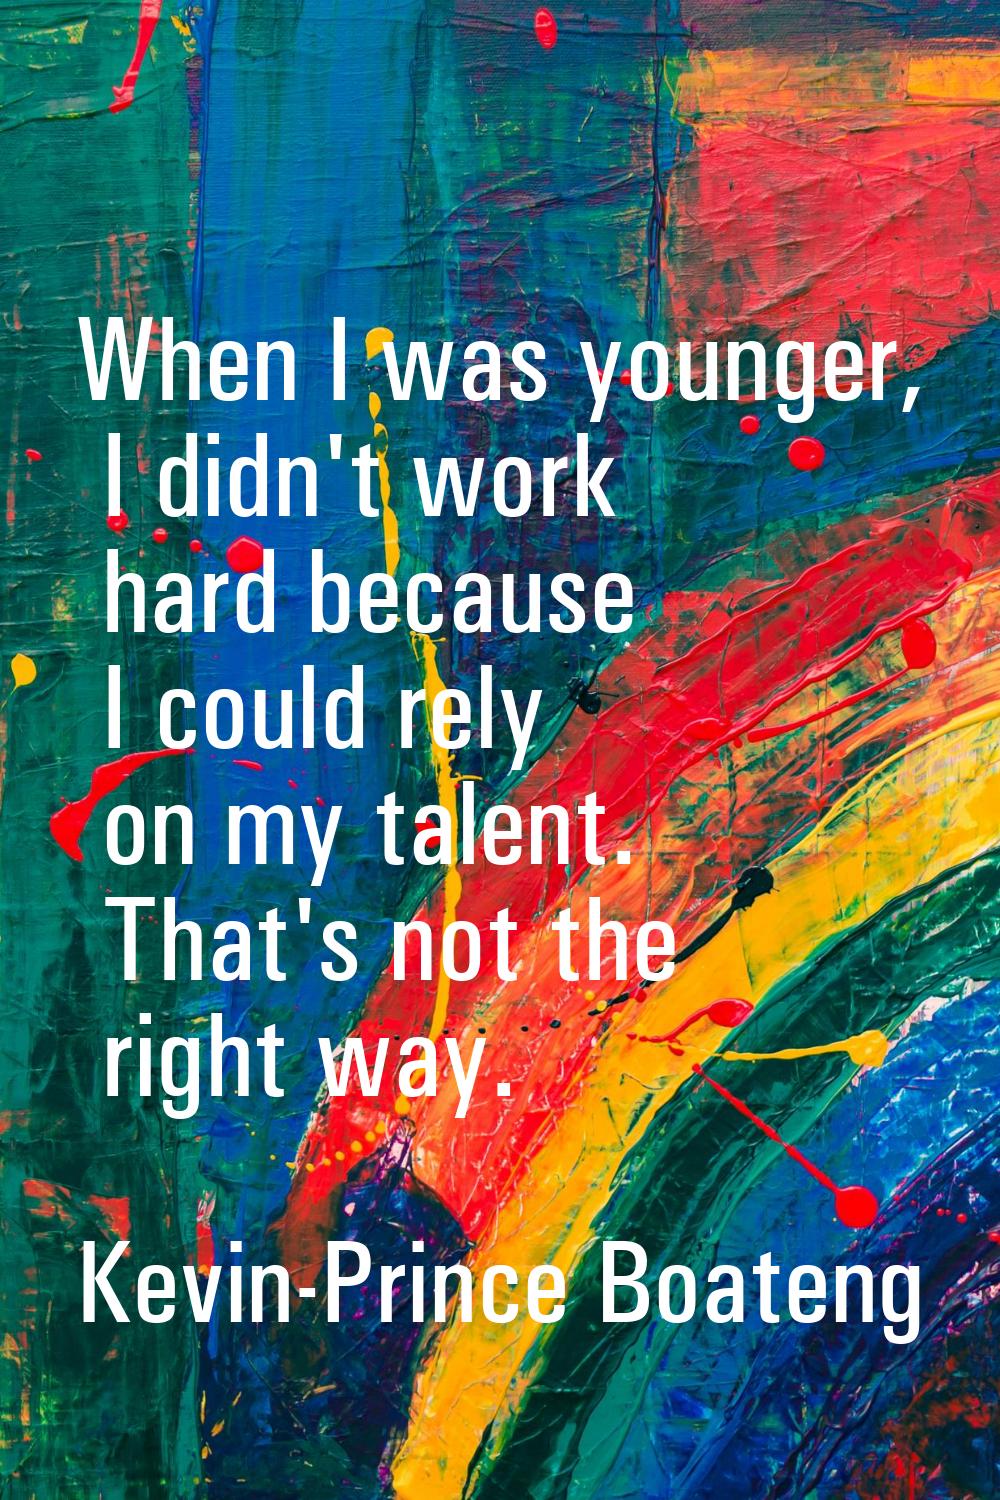 When I was younger, I didn't work hard because I could rely on my talent. That's not the right way.